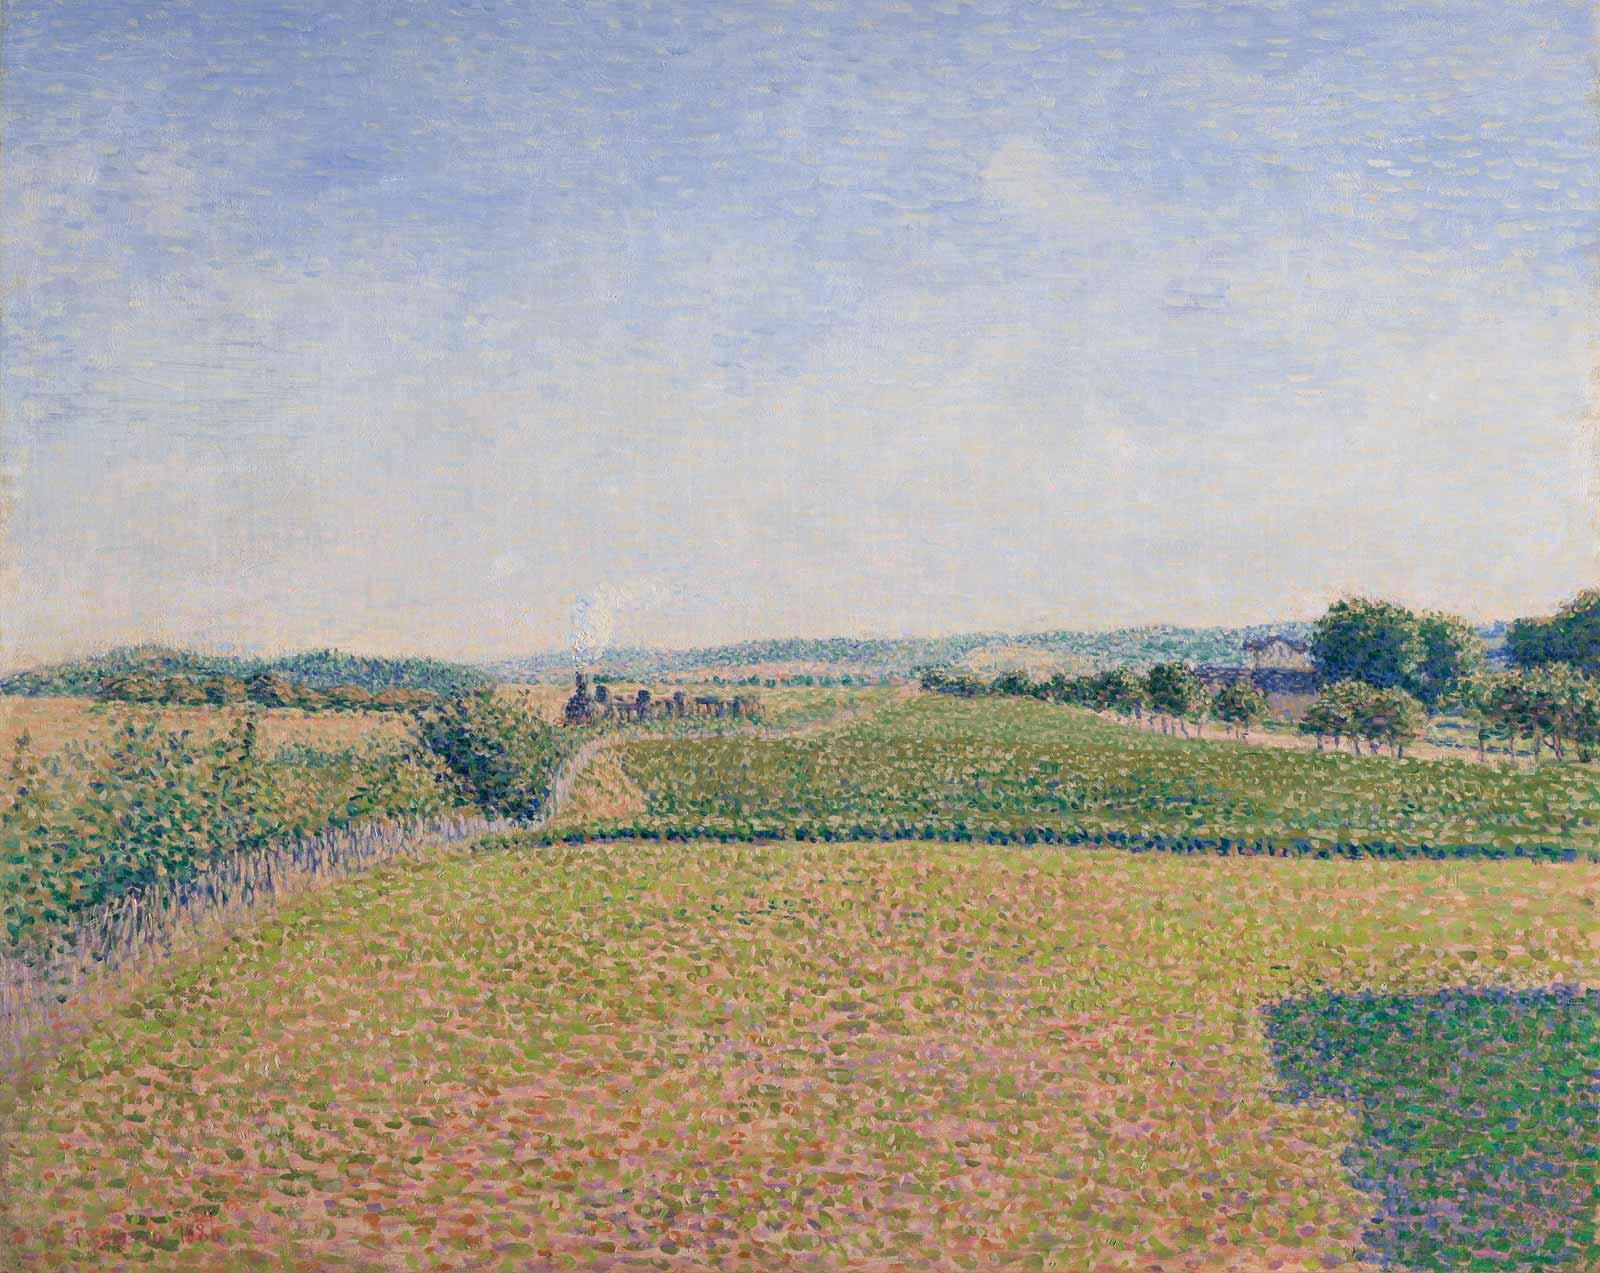 Railroad to Dieppe, 1886, by Camille Pissarro